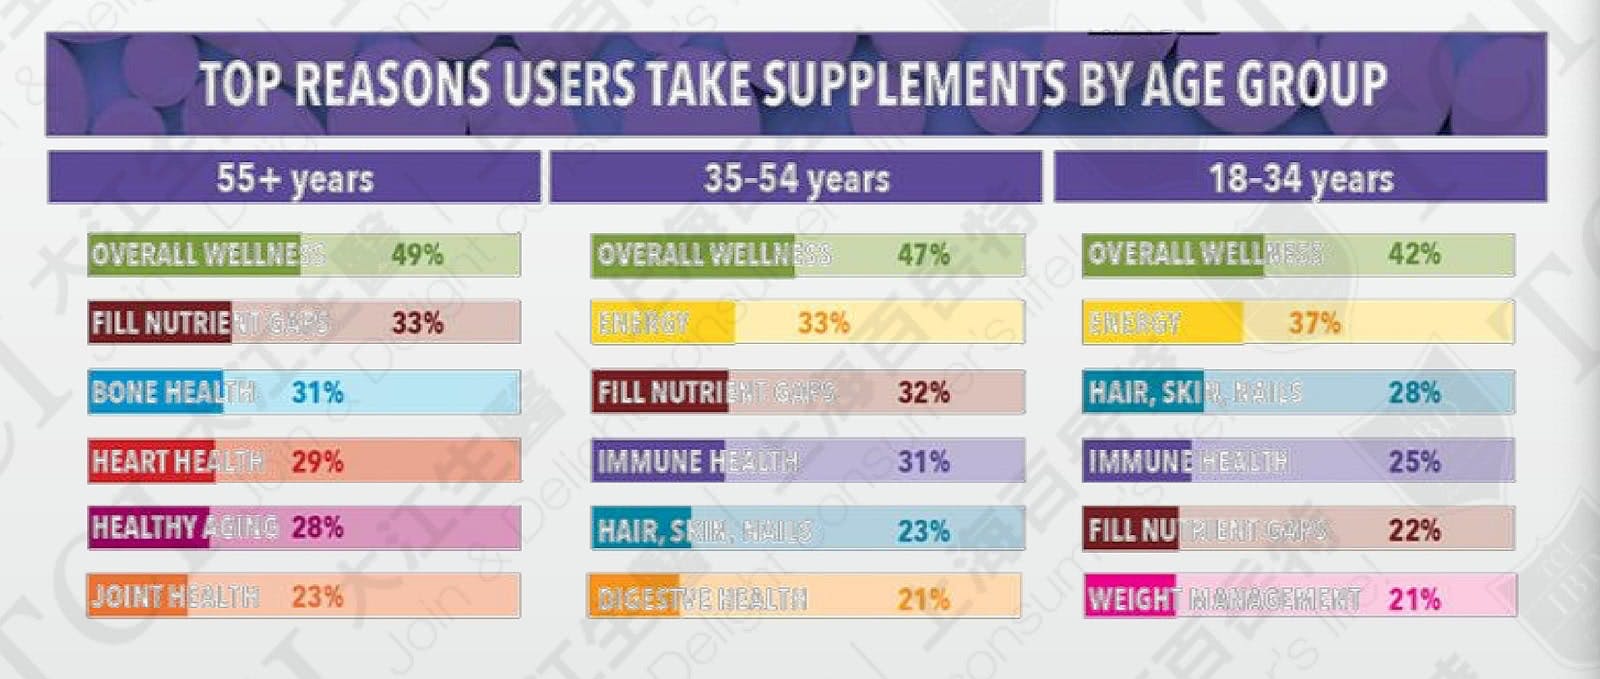 2018 Top Reasons for USA Consumers Taking Supplement by Age, Data Source: CRN